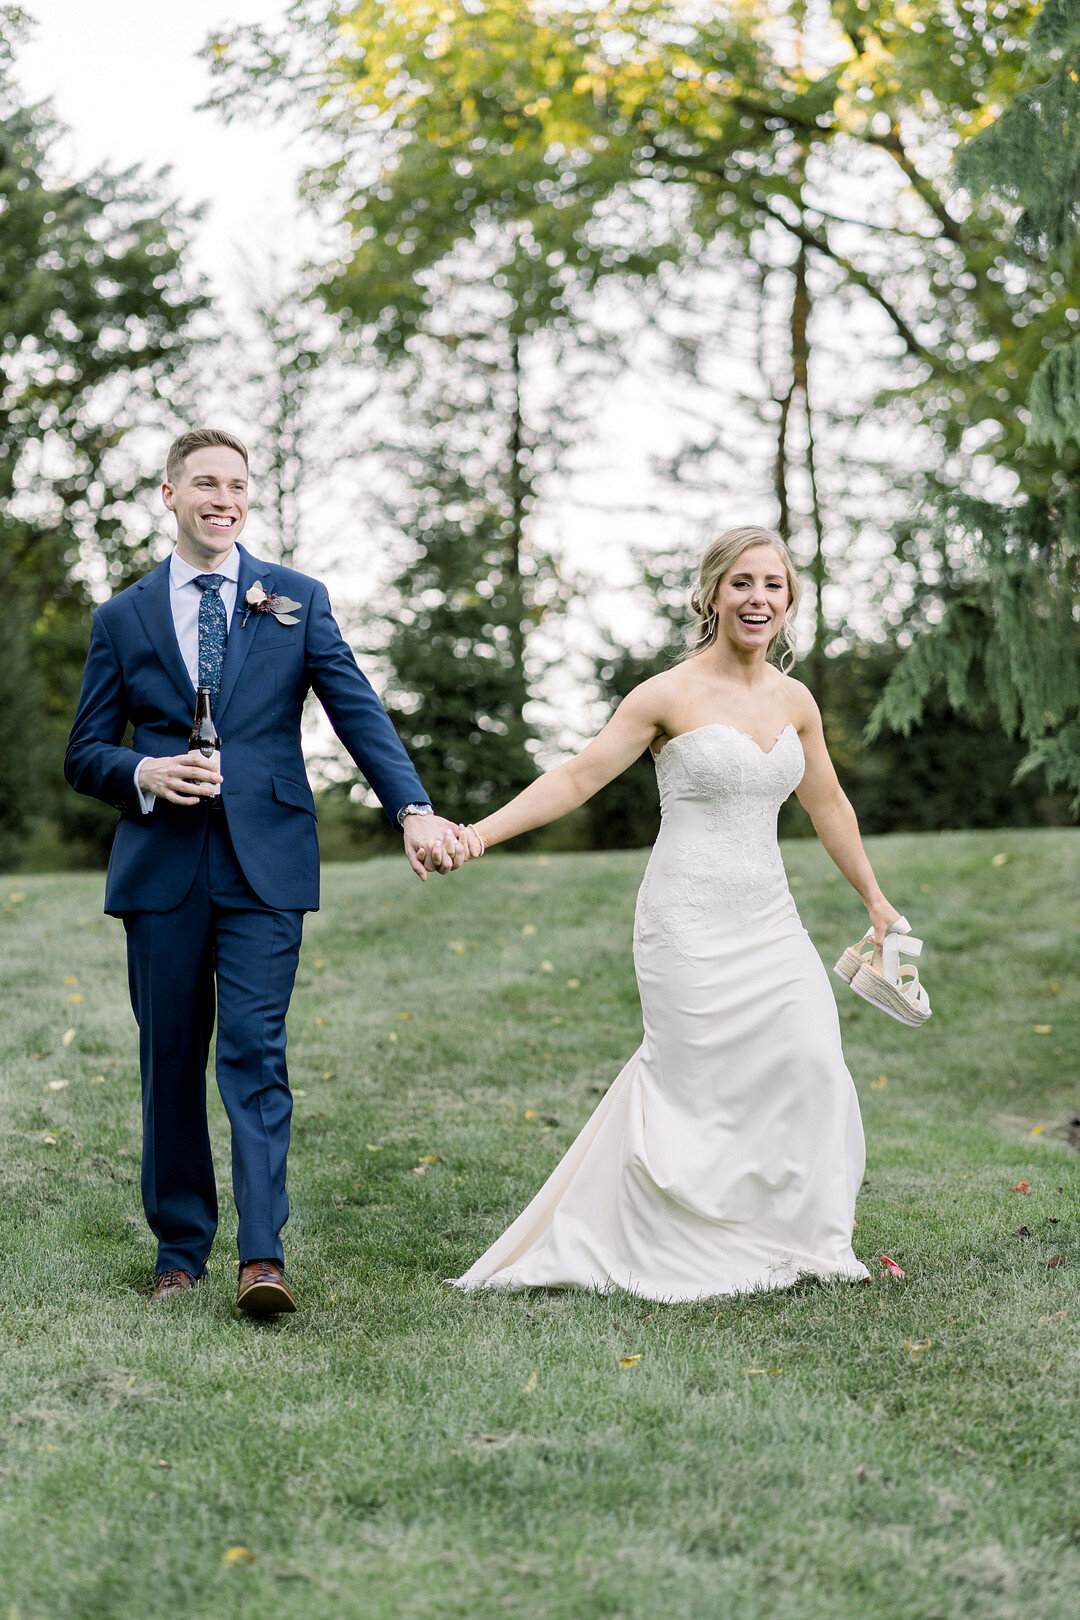 When faced with having to move their entire wedding from Boston to Pennsylvania, Kim and Kyle never expected to find a new vendor team and location in just two weeks but luck came through and they found the perfect team of vendors and a new venue to…